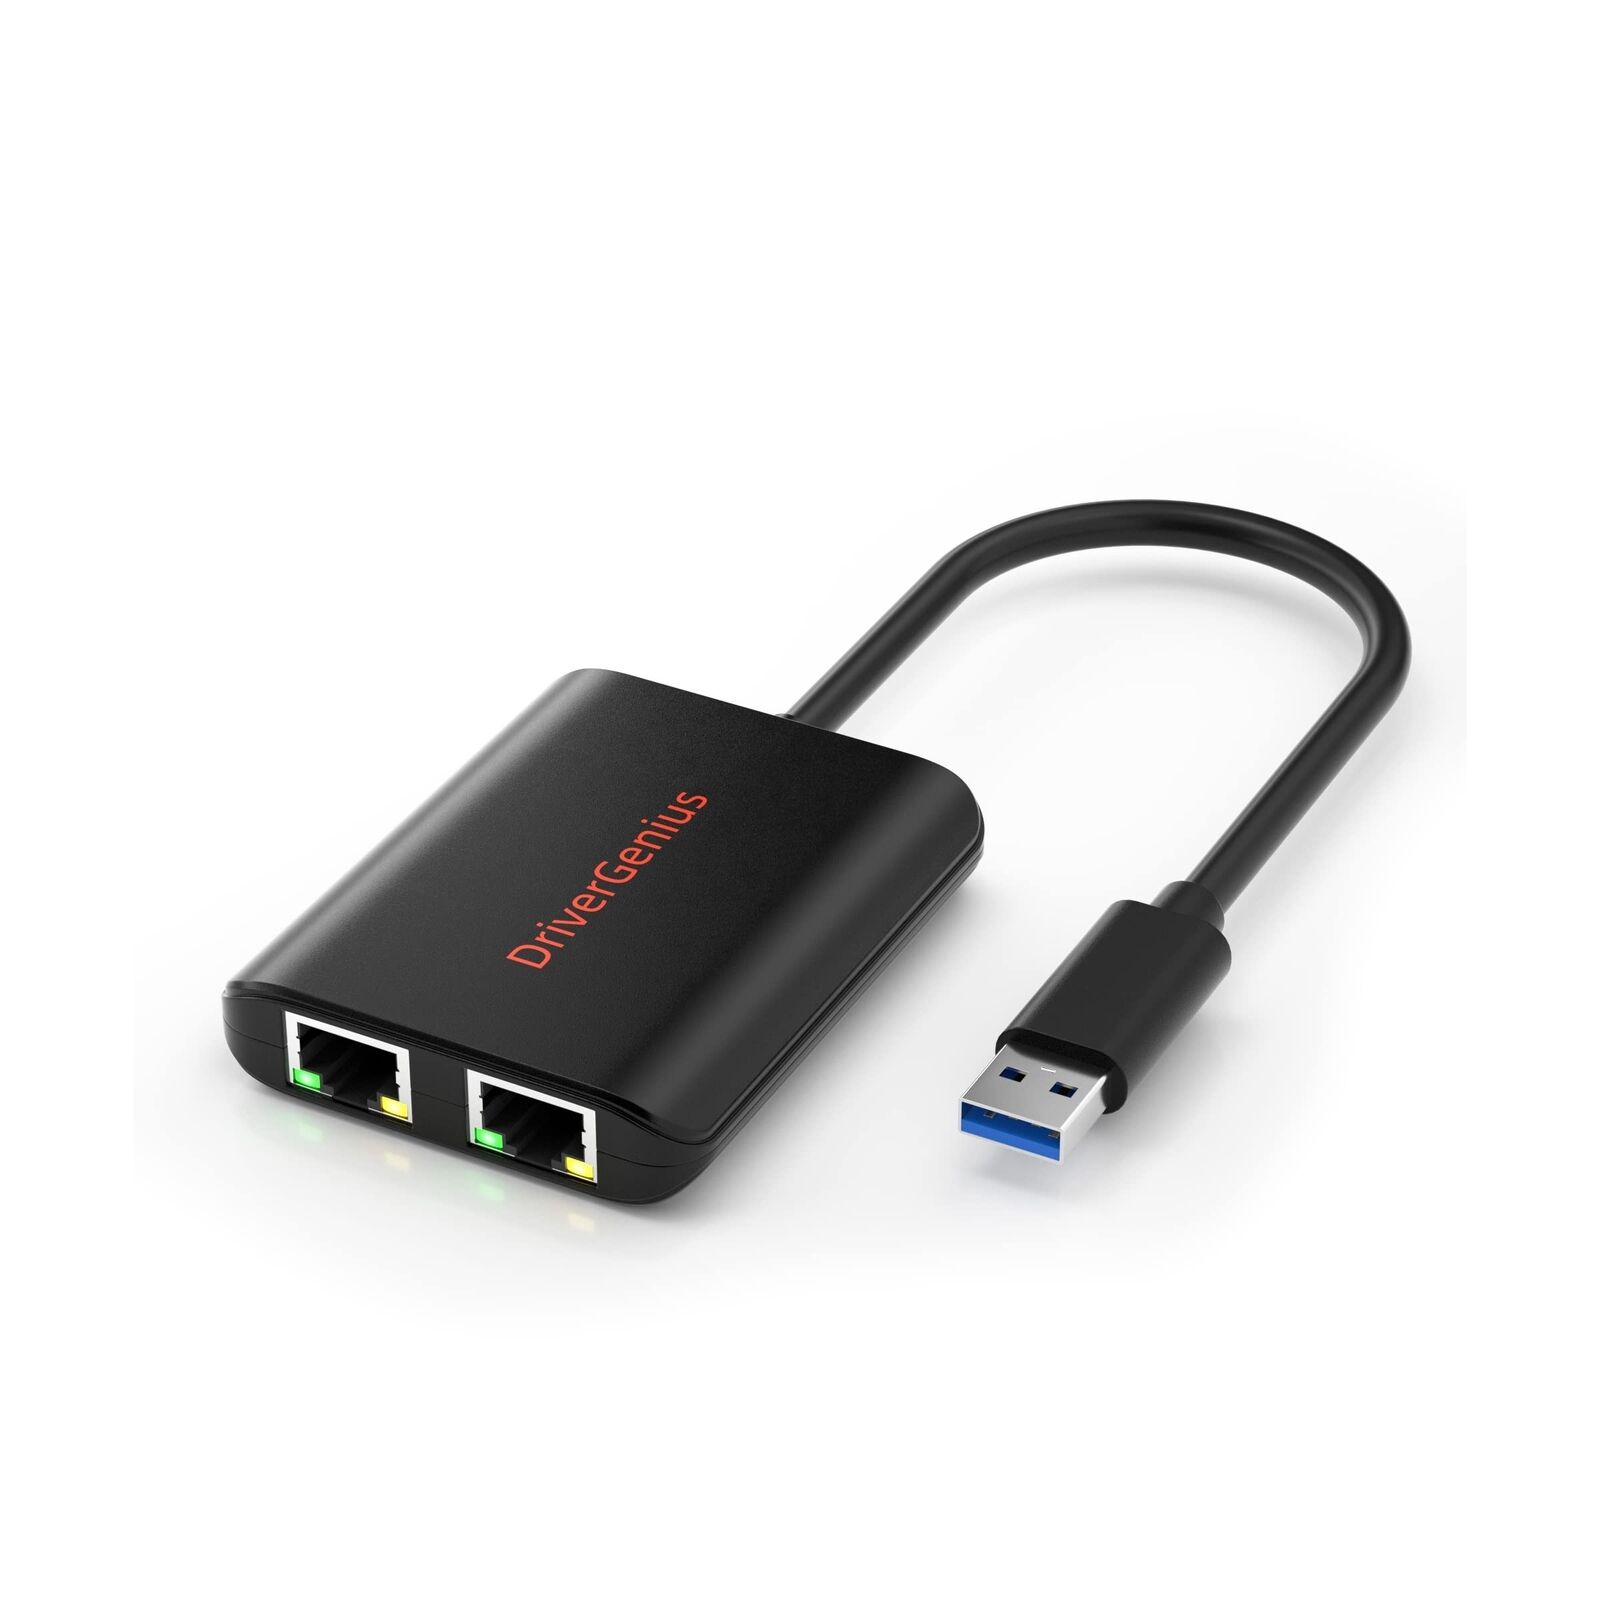 USB 3.0 to Dual Port Gigabit Ethernet Adapter for Business or IT Professional...